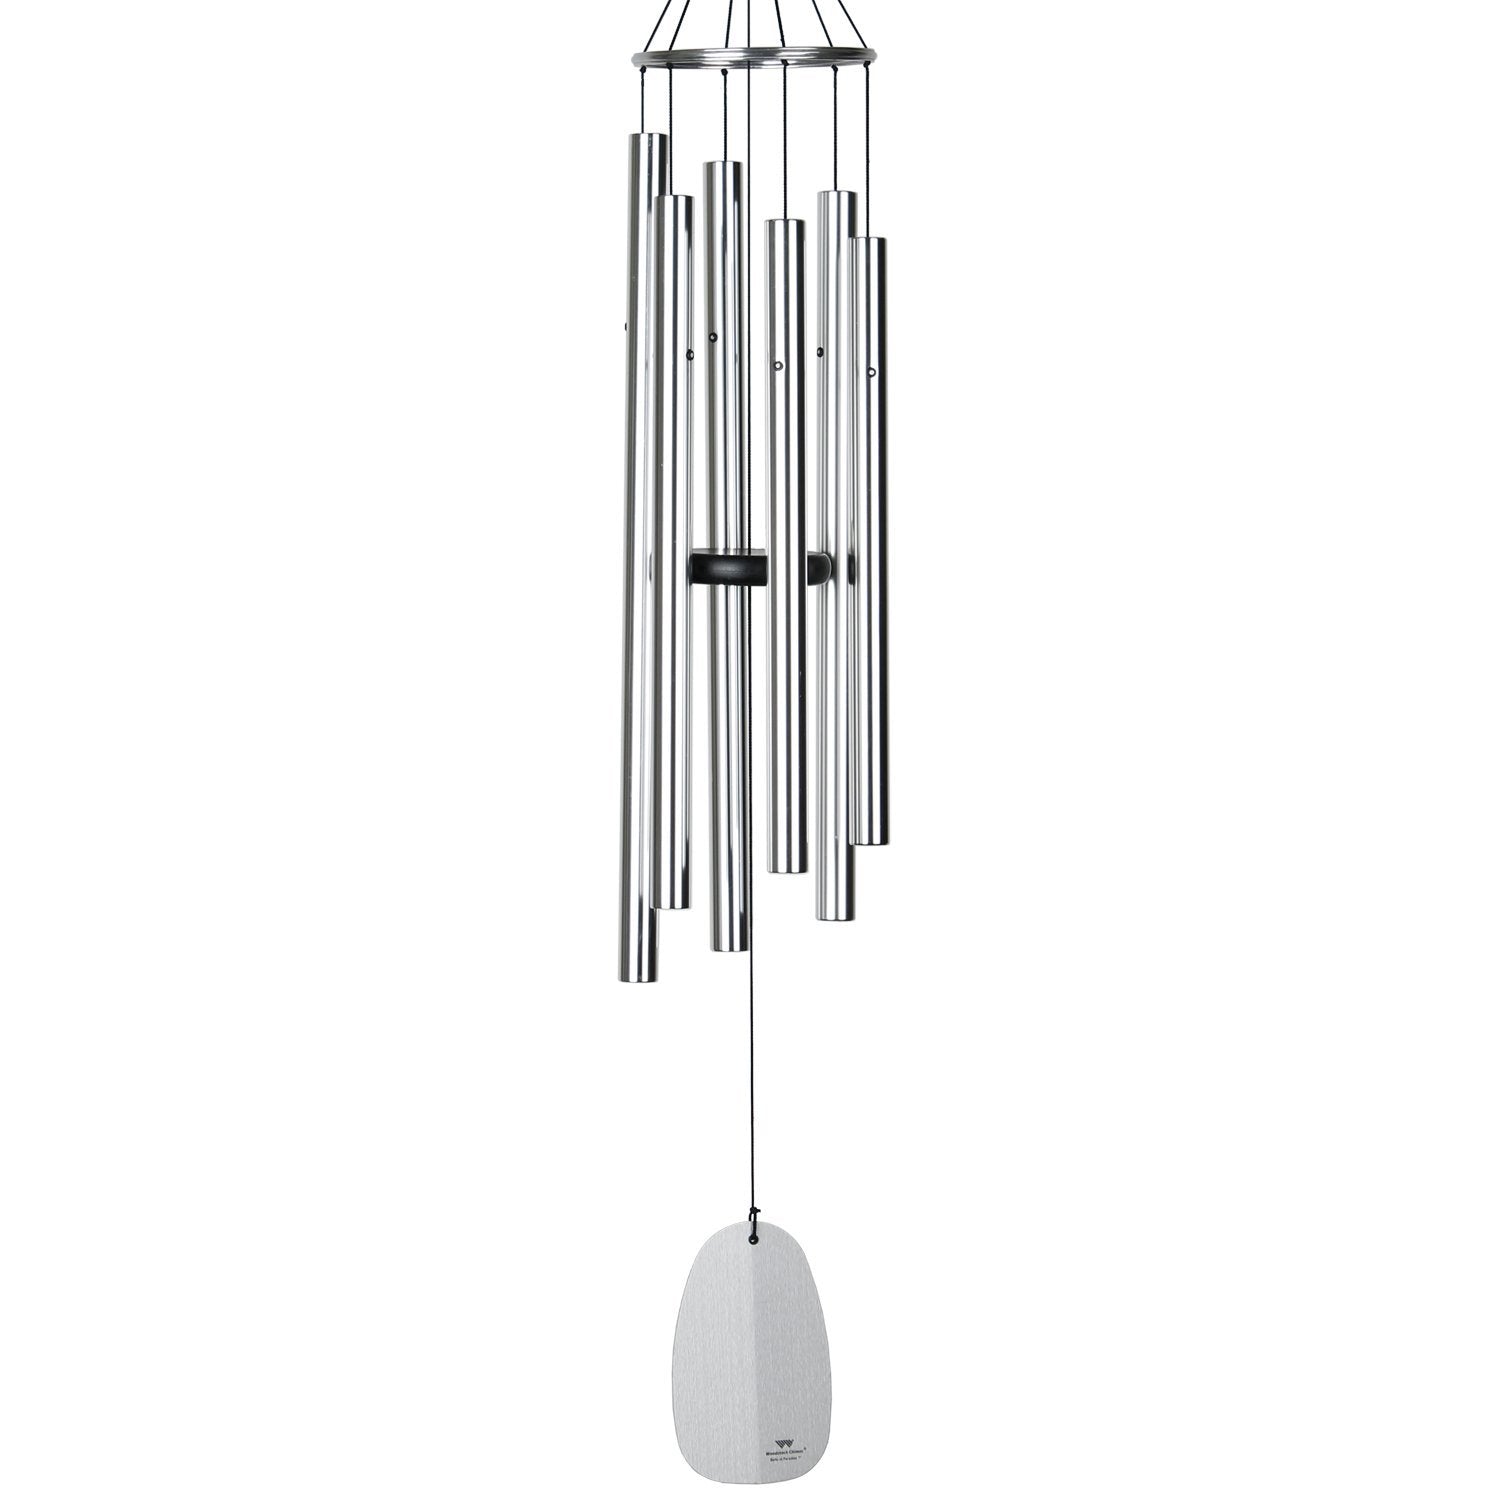 Bells of Paradise - Silver, 44-Inch main image